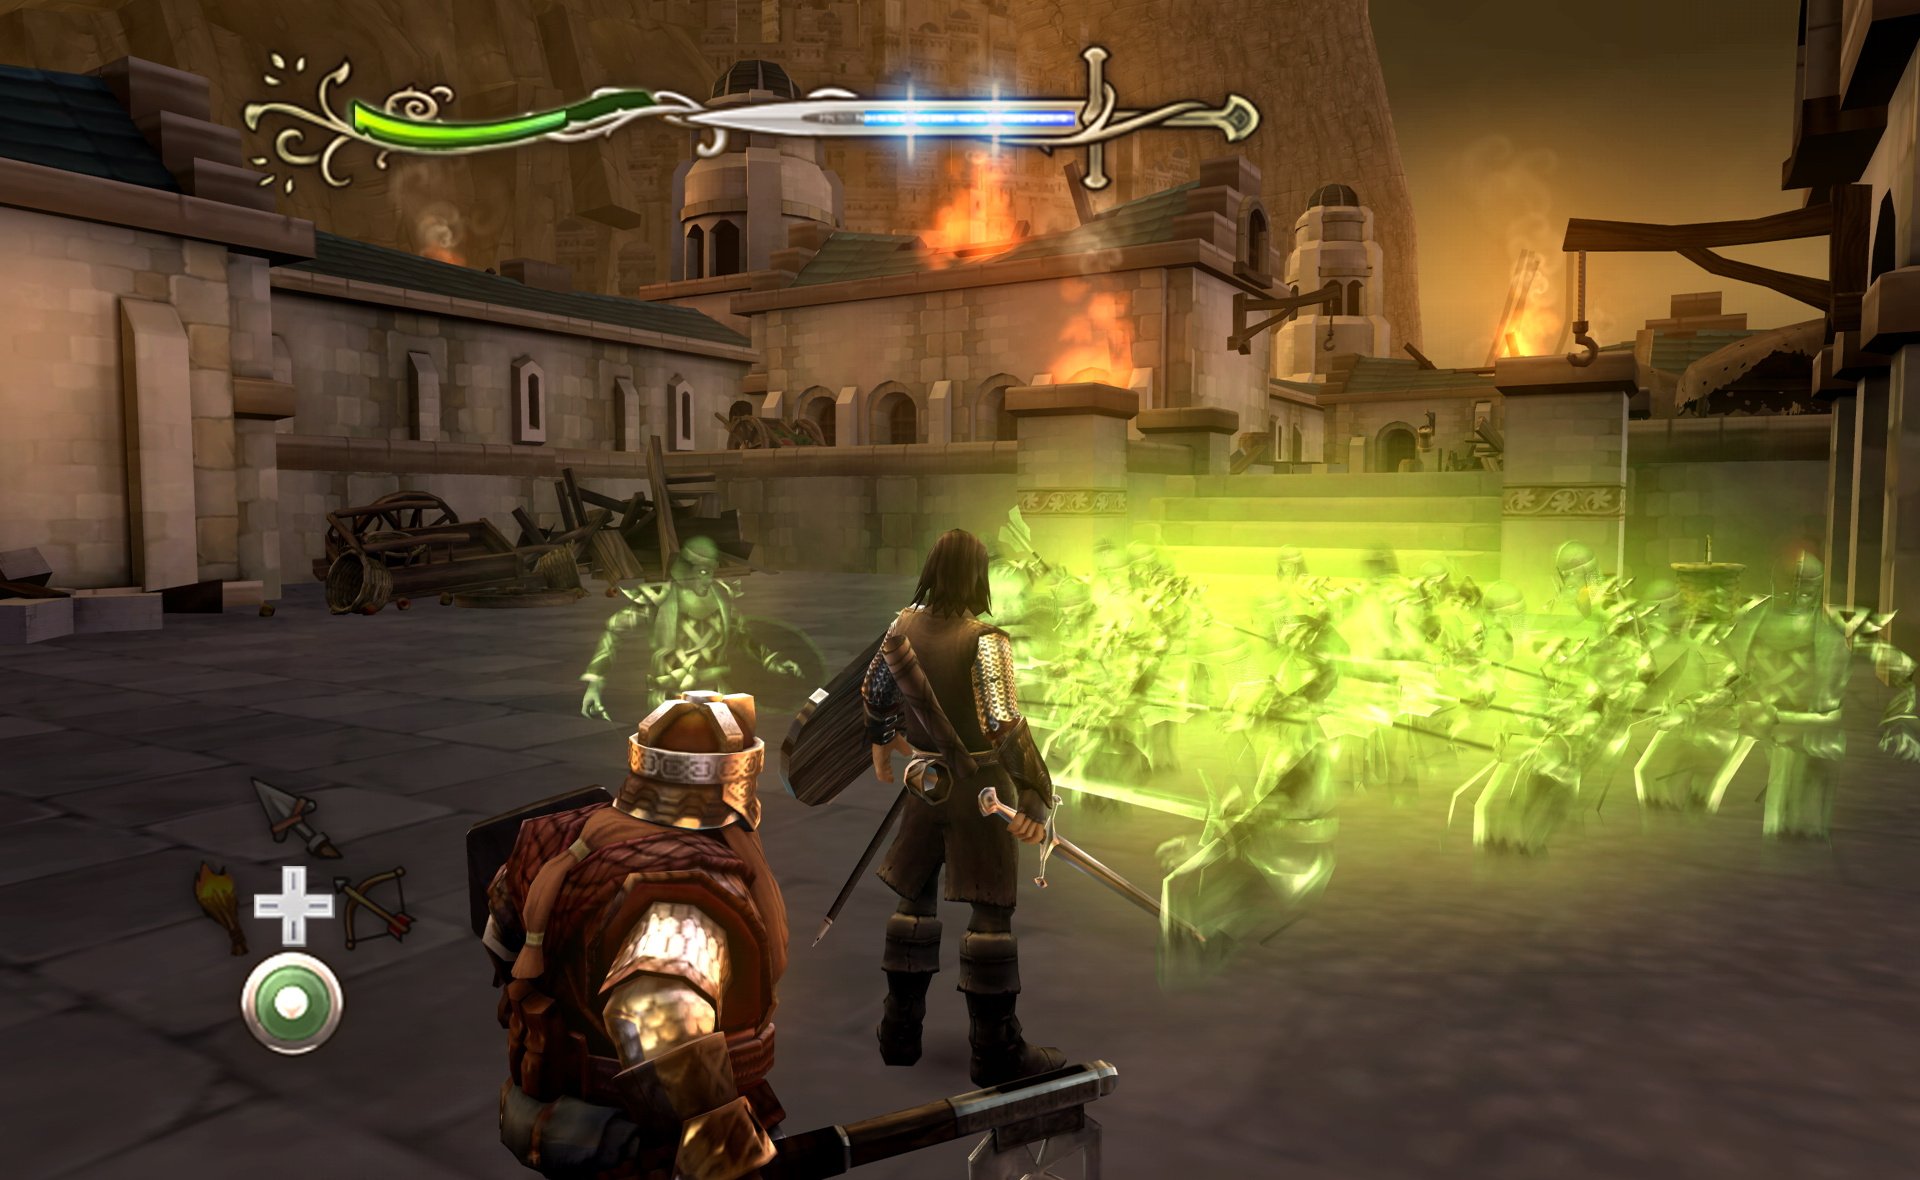 Lord of the Rings Aragorn's Quest (Wii) Game Profile News, Reviews